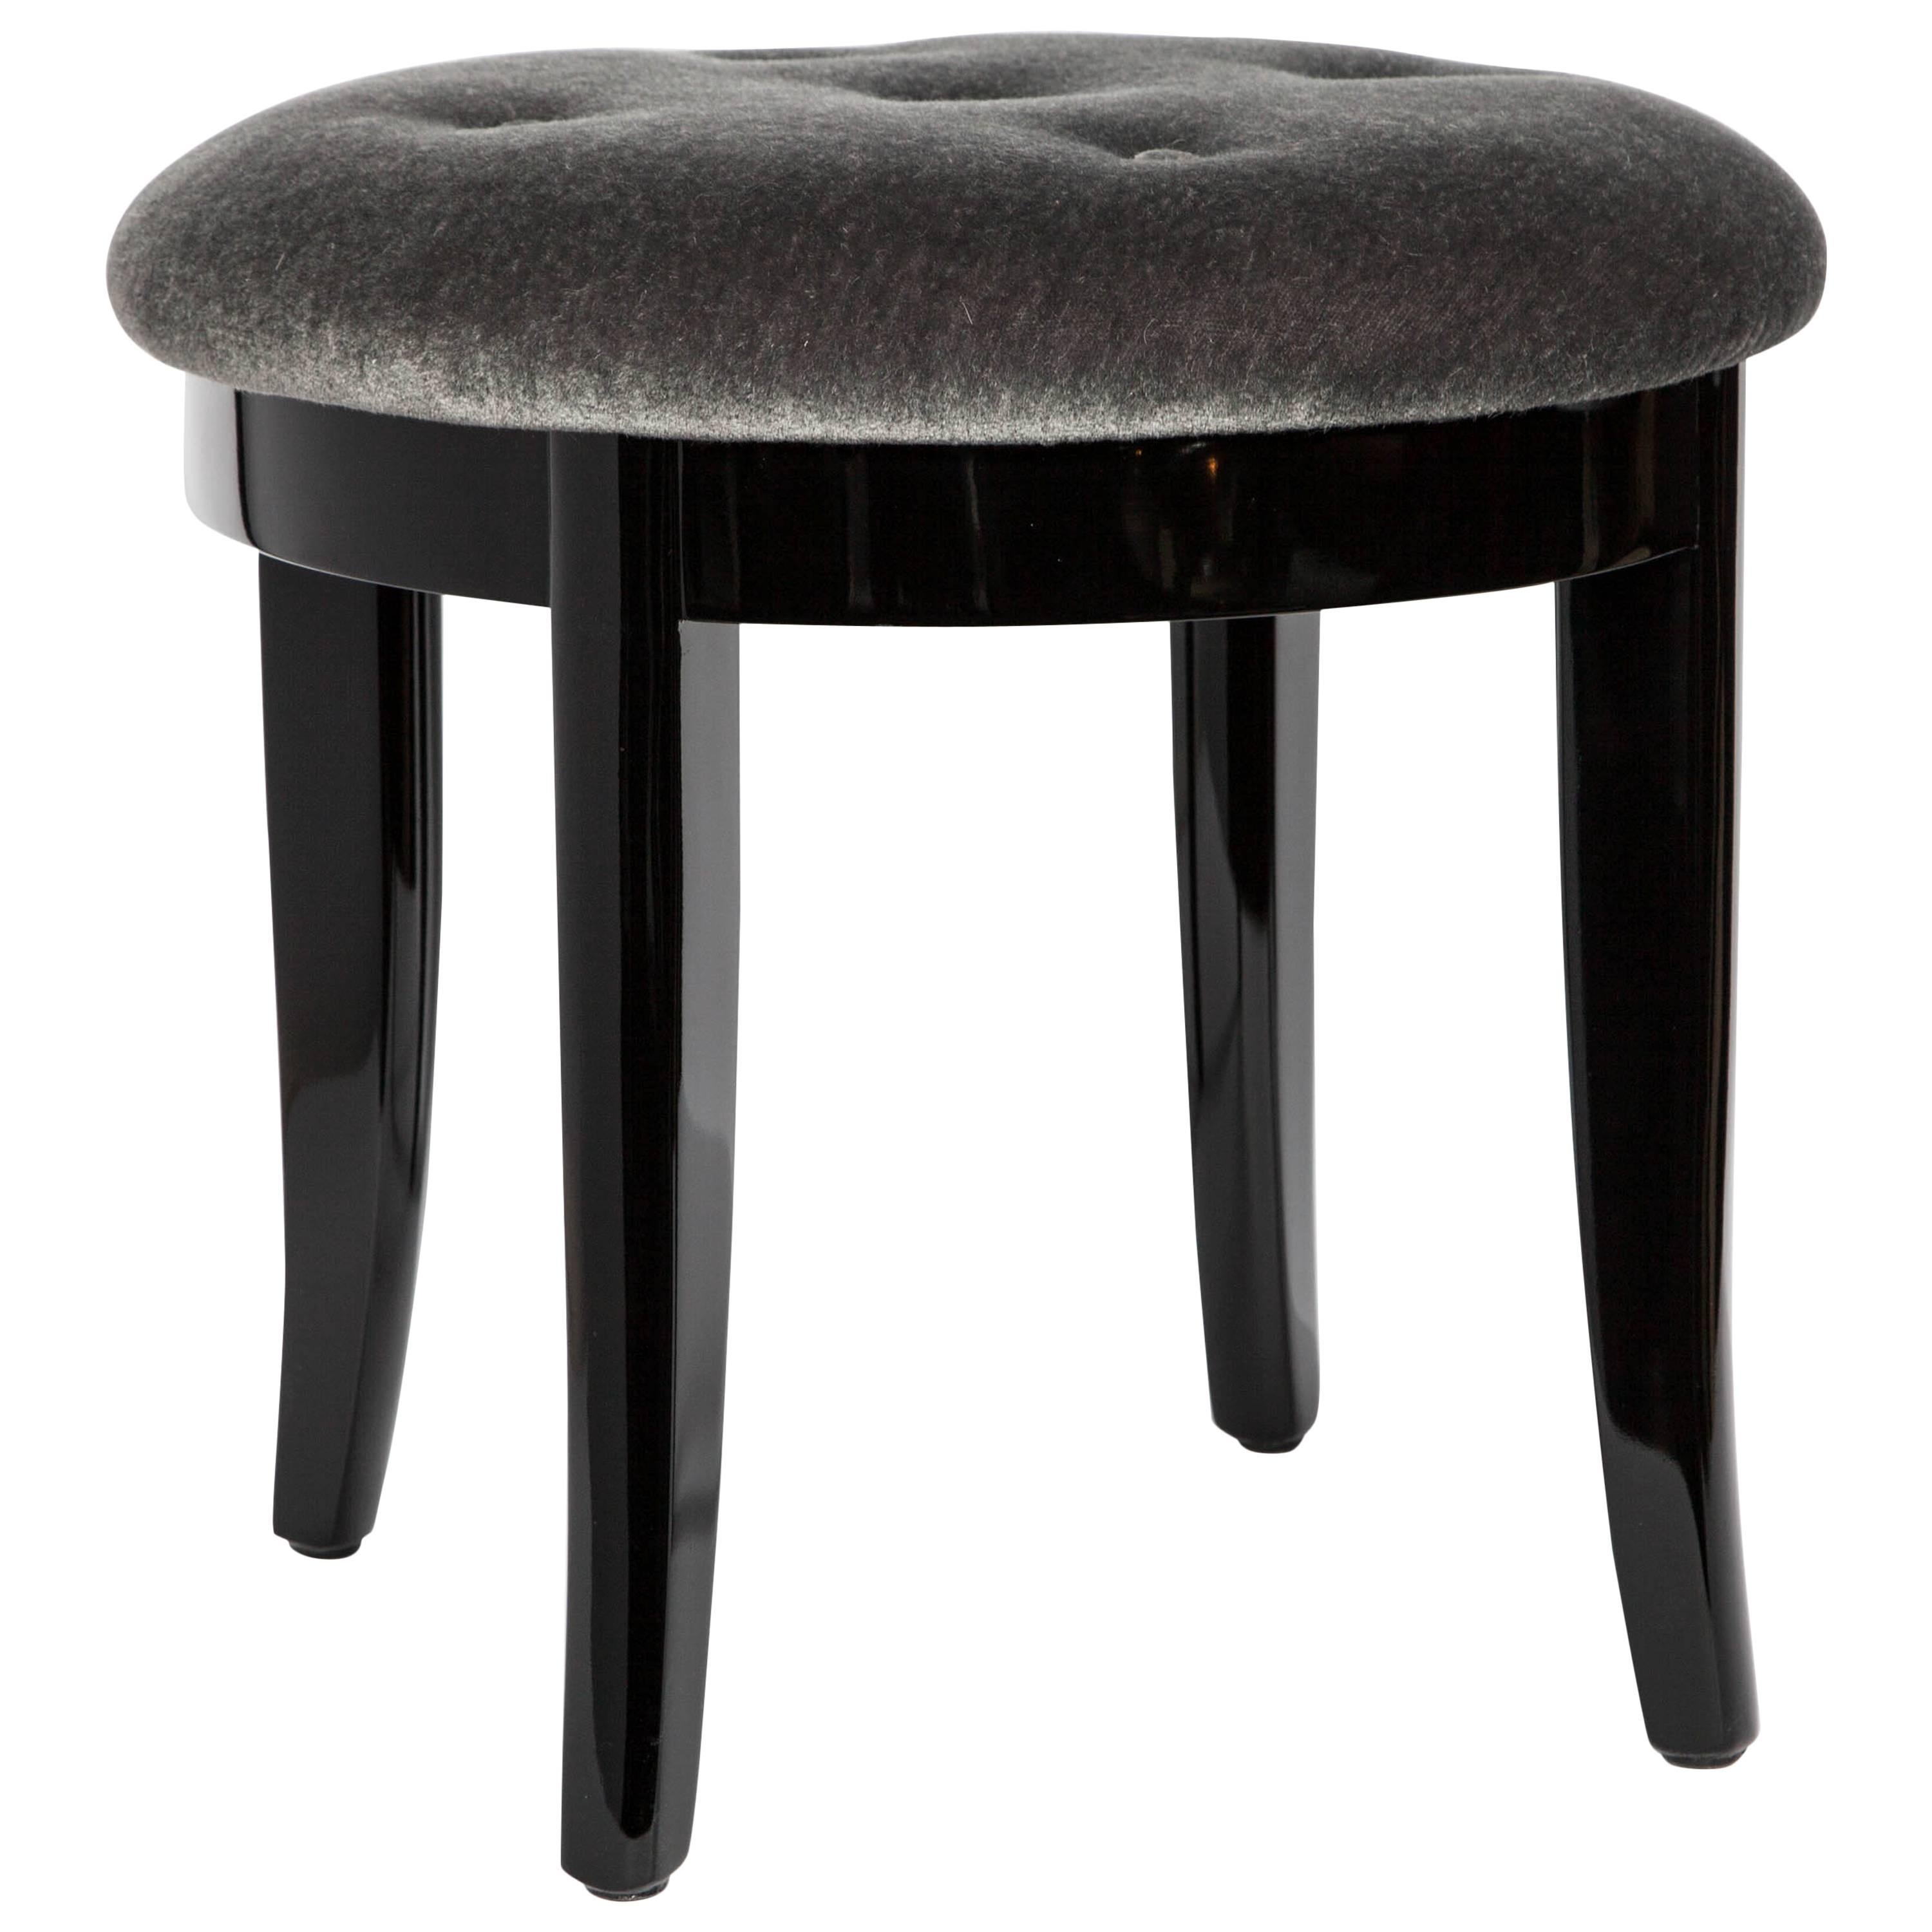 Art Deco vanity stool in a luxurious gunmetal mohair with a black lacquered finish. The stool features a round seat design with slightly splayed legs, and button seat details.